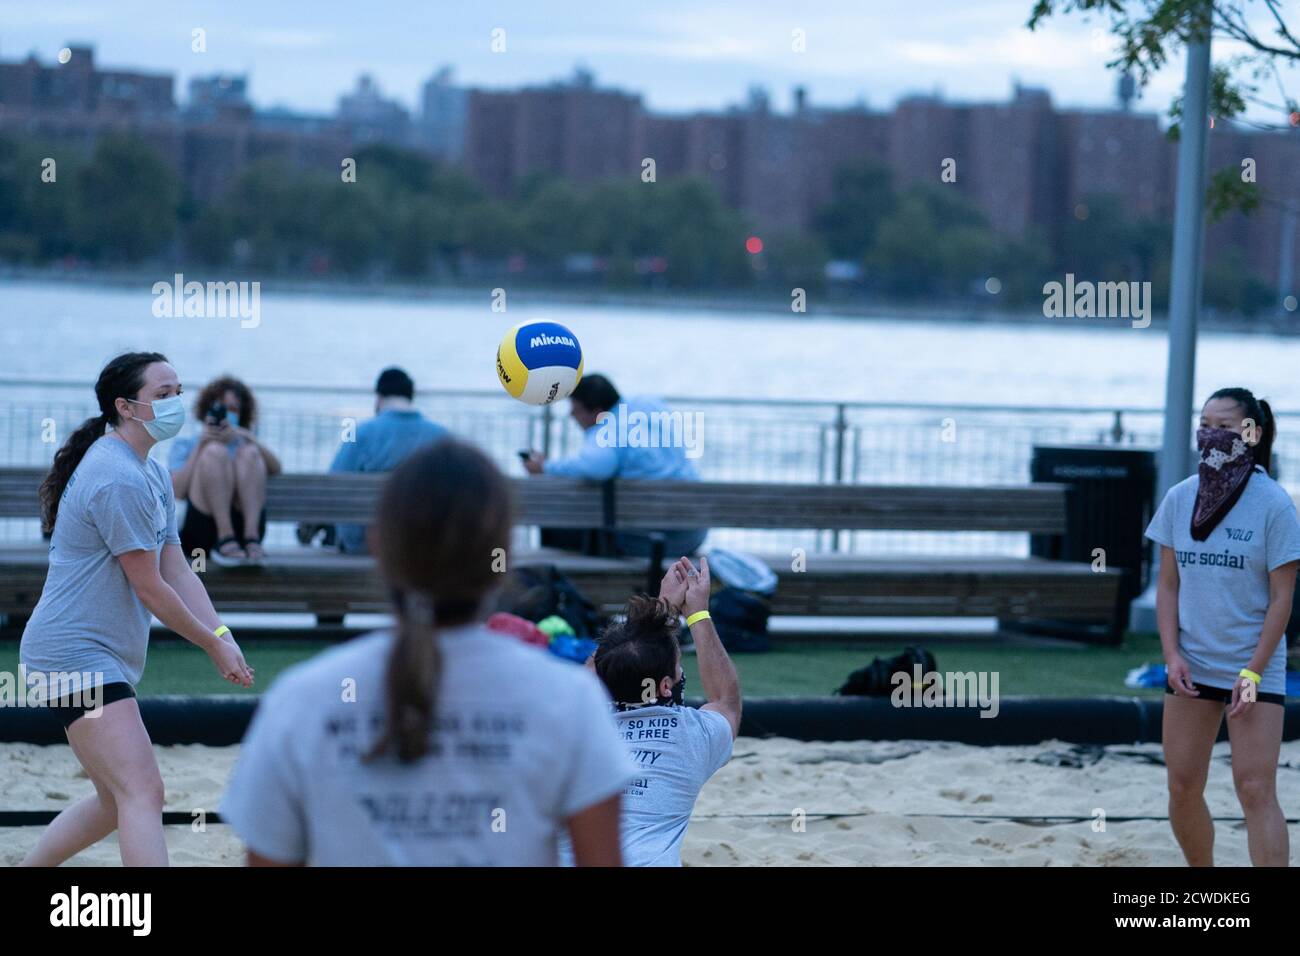 People wearing face masks, playing volleyball at a competition for Volo City Kids Foundation at Domino Park in Williamsburg, Brooklyn.New York City is preparing to move into Phase 4 of re-opening following restrictions imposed to curb the coronavirus pandemic. Phase 4 involves reopening of: Zoos, pro sports, TV and movie crews. Stock Photo